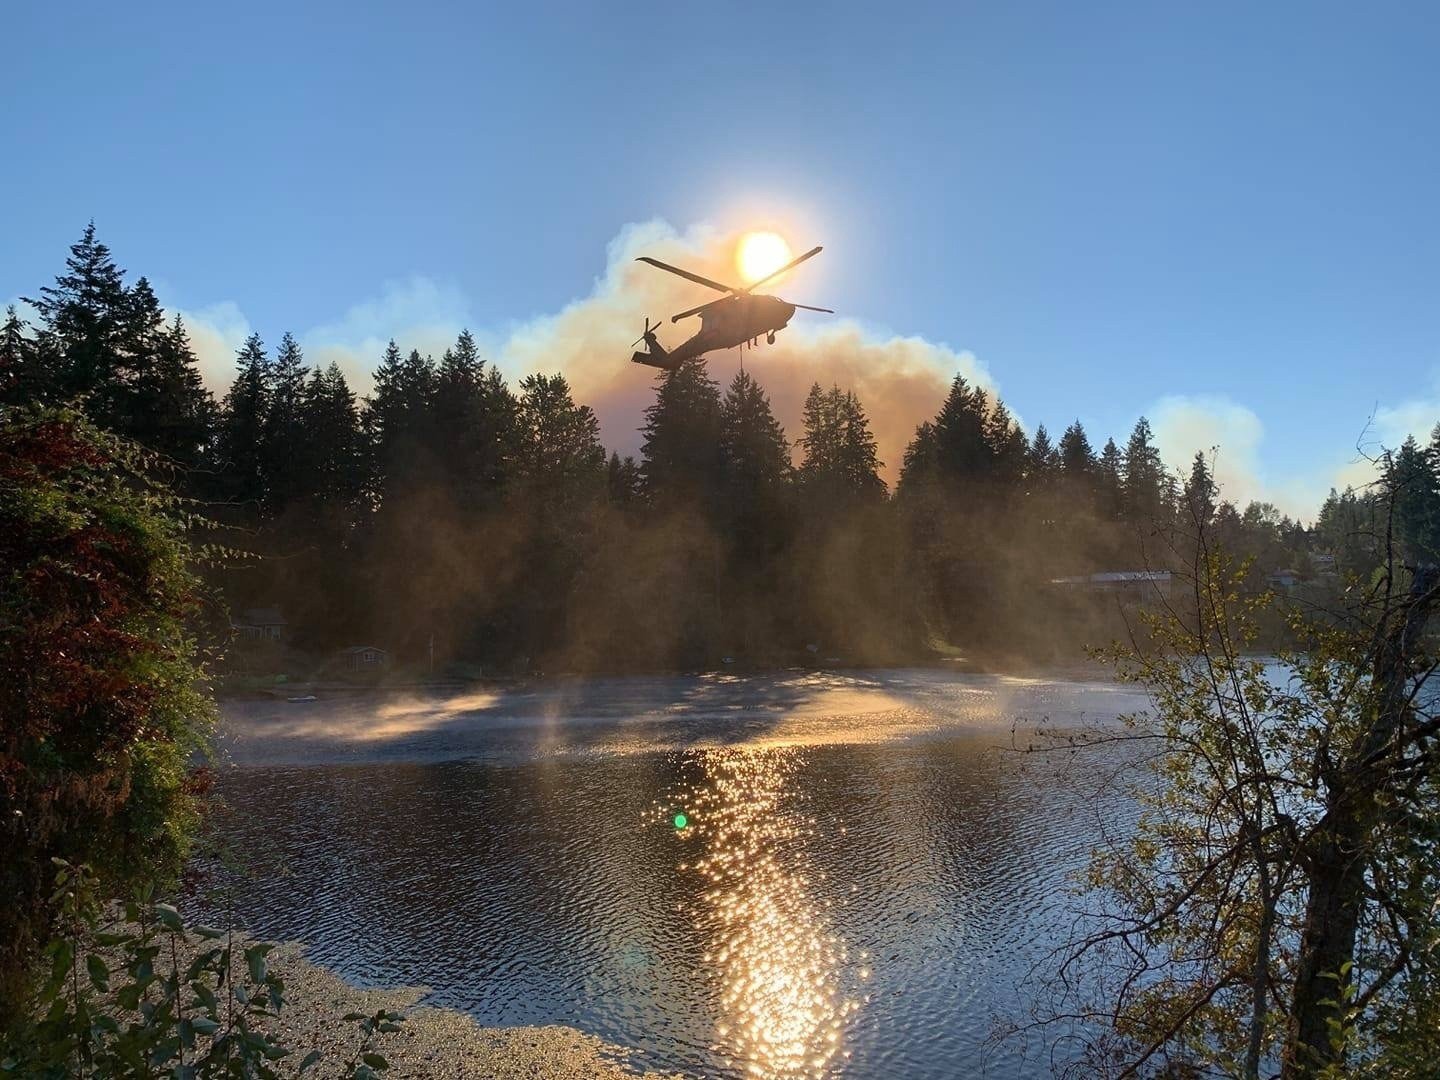 A Washington Army National Guard Black Hawk helicopter loads up a water bucket in a lake near Bonney Lake, Wash. on Sept 9, 2020. Washington National Guard flight crews dropped more than 280,000 gallons of water on the Sumner Grade Fire. Courtesy photo